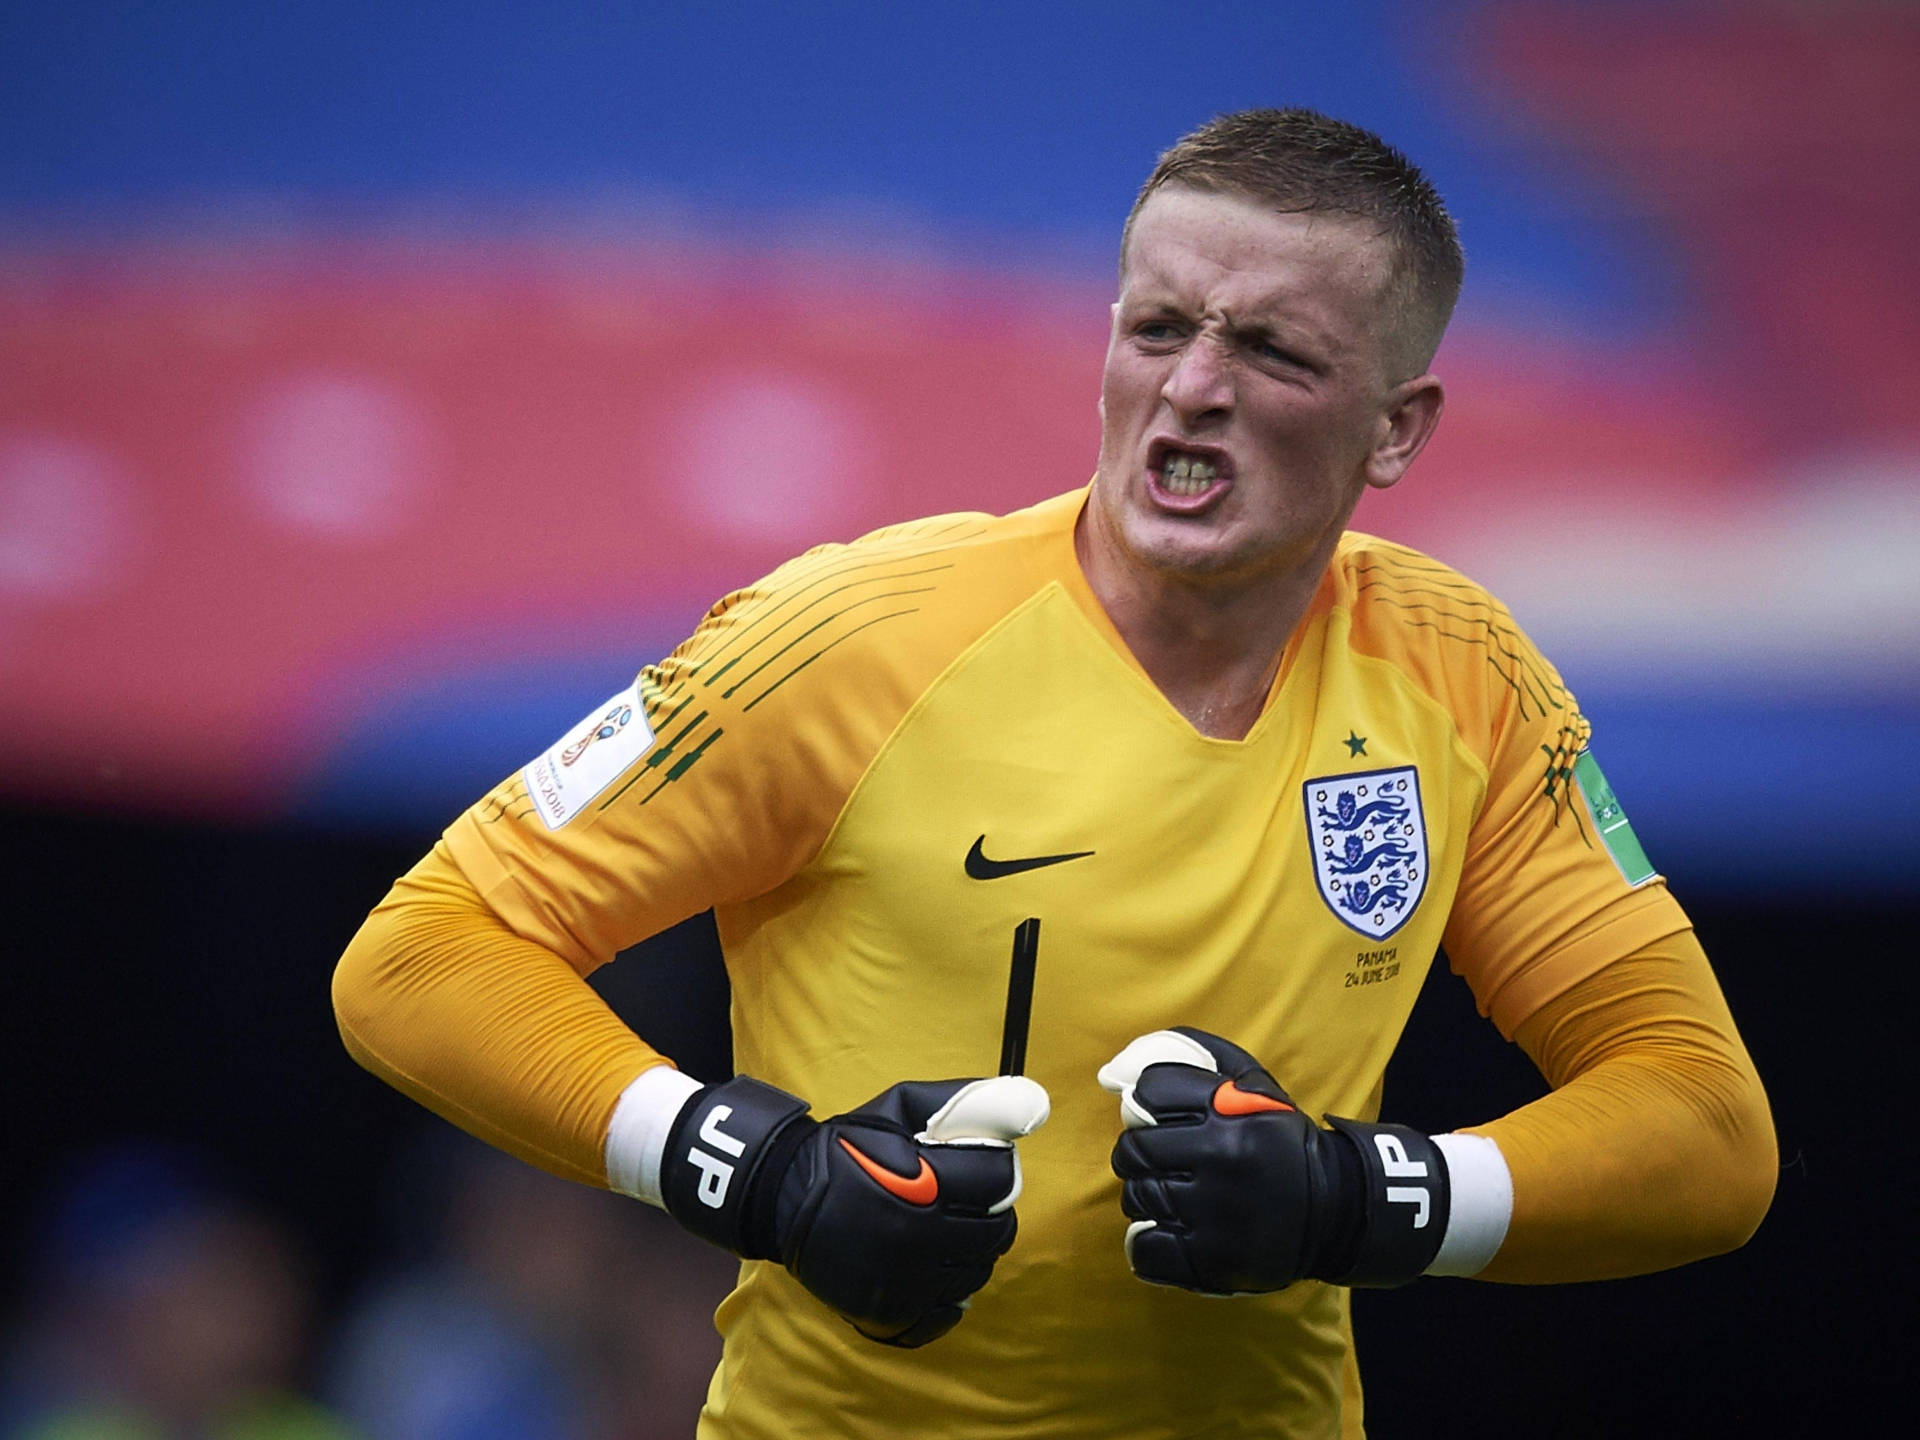 Jordan Pickford With Clenched Fists Wallpaper